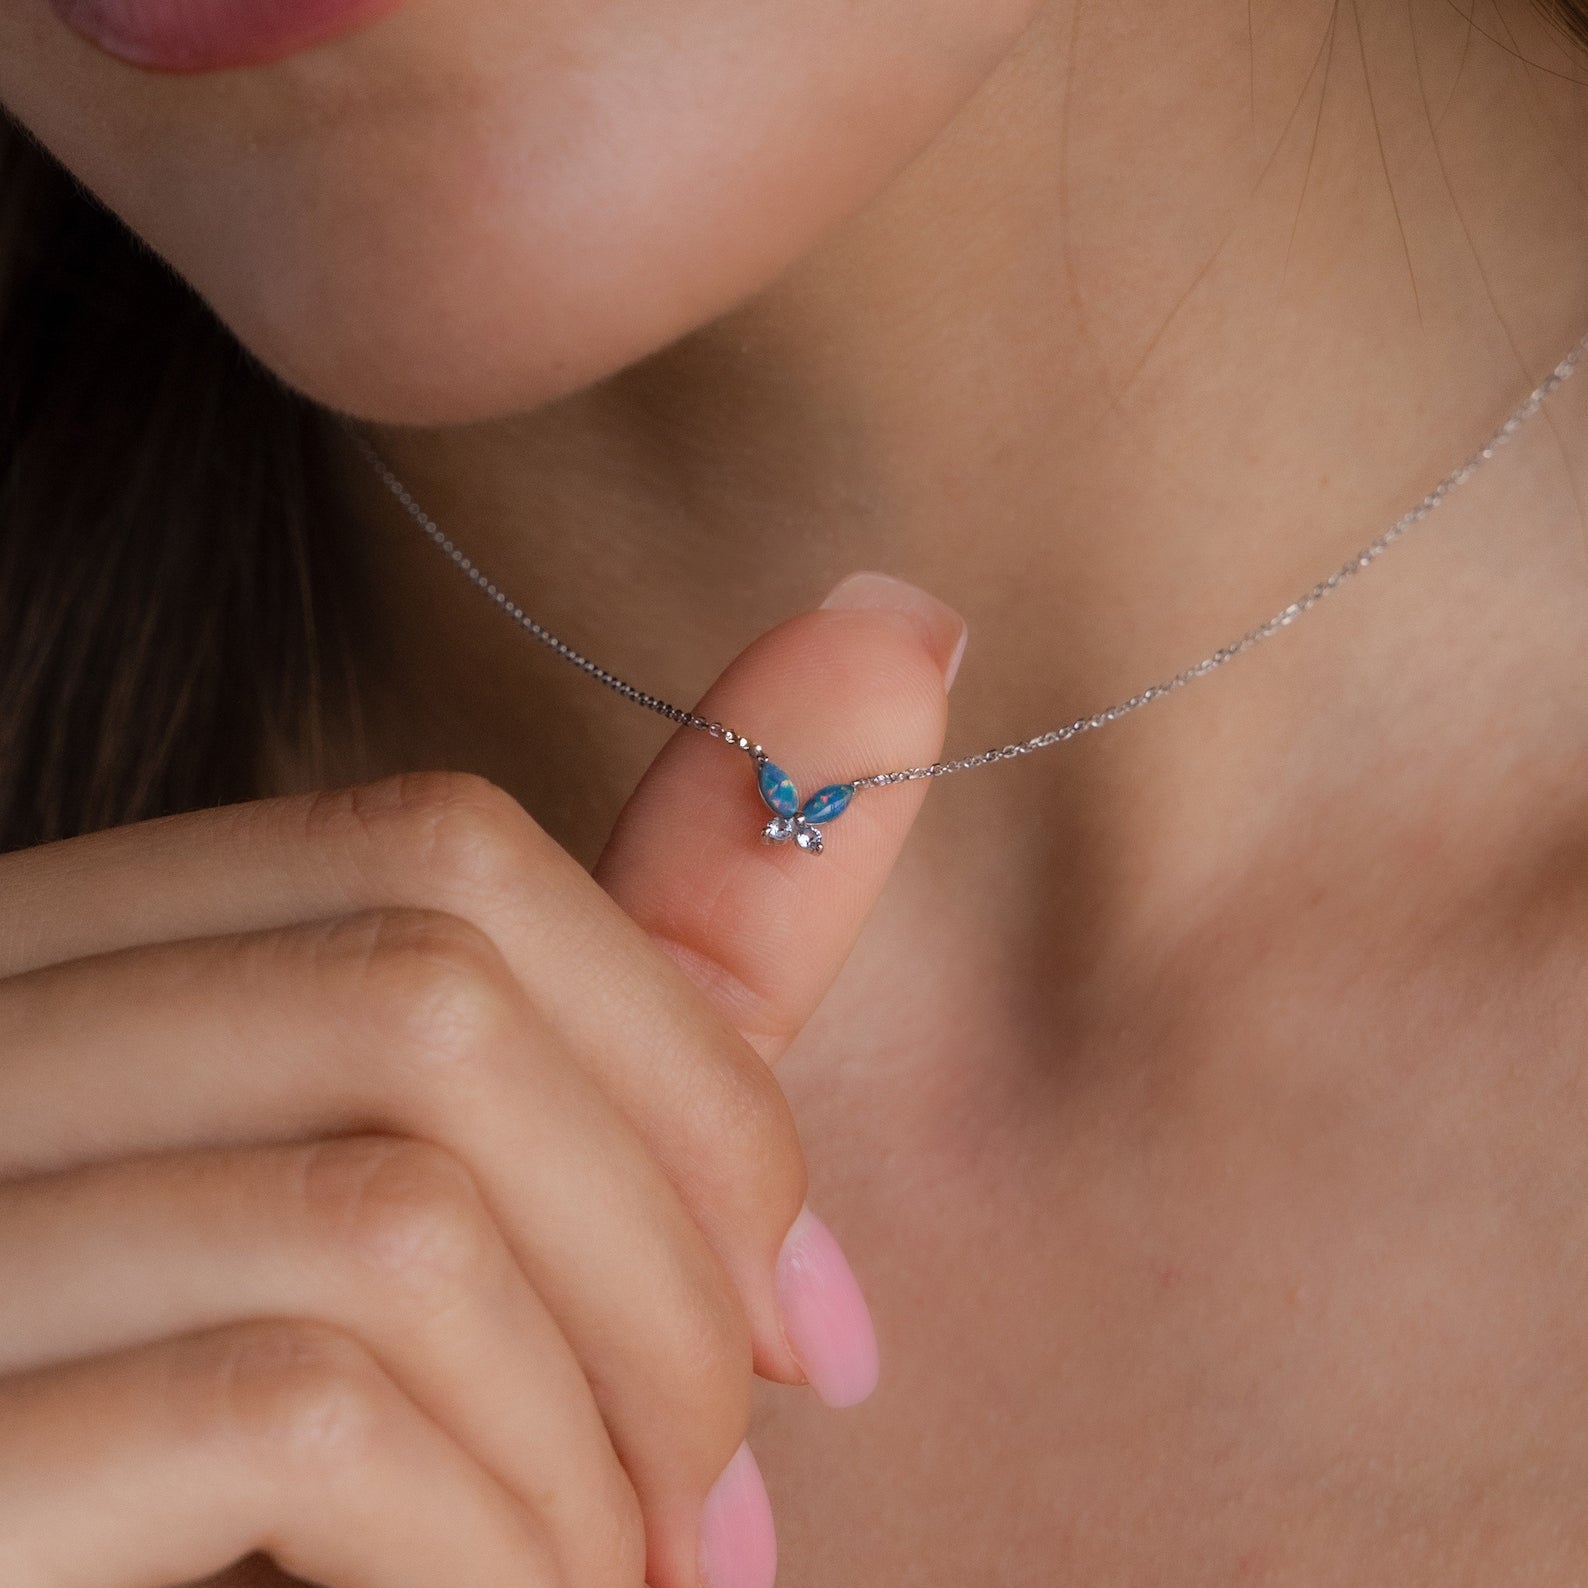 Blue Butterfly Necklace in Sterling Silver and Light Blue Mother of Pearl,  Easter Gift Ideas, Gift Idea Fo Mothers Day - Etsy | Butterfly necklace,  Dragonfly jewelry, Feather necklaces